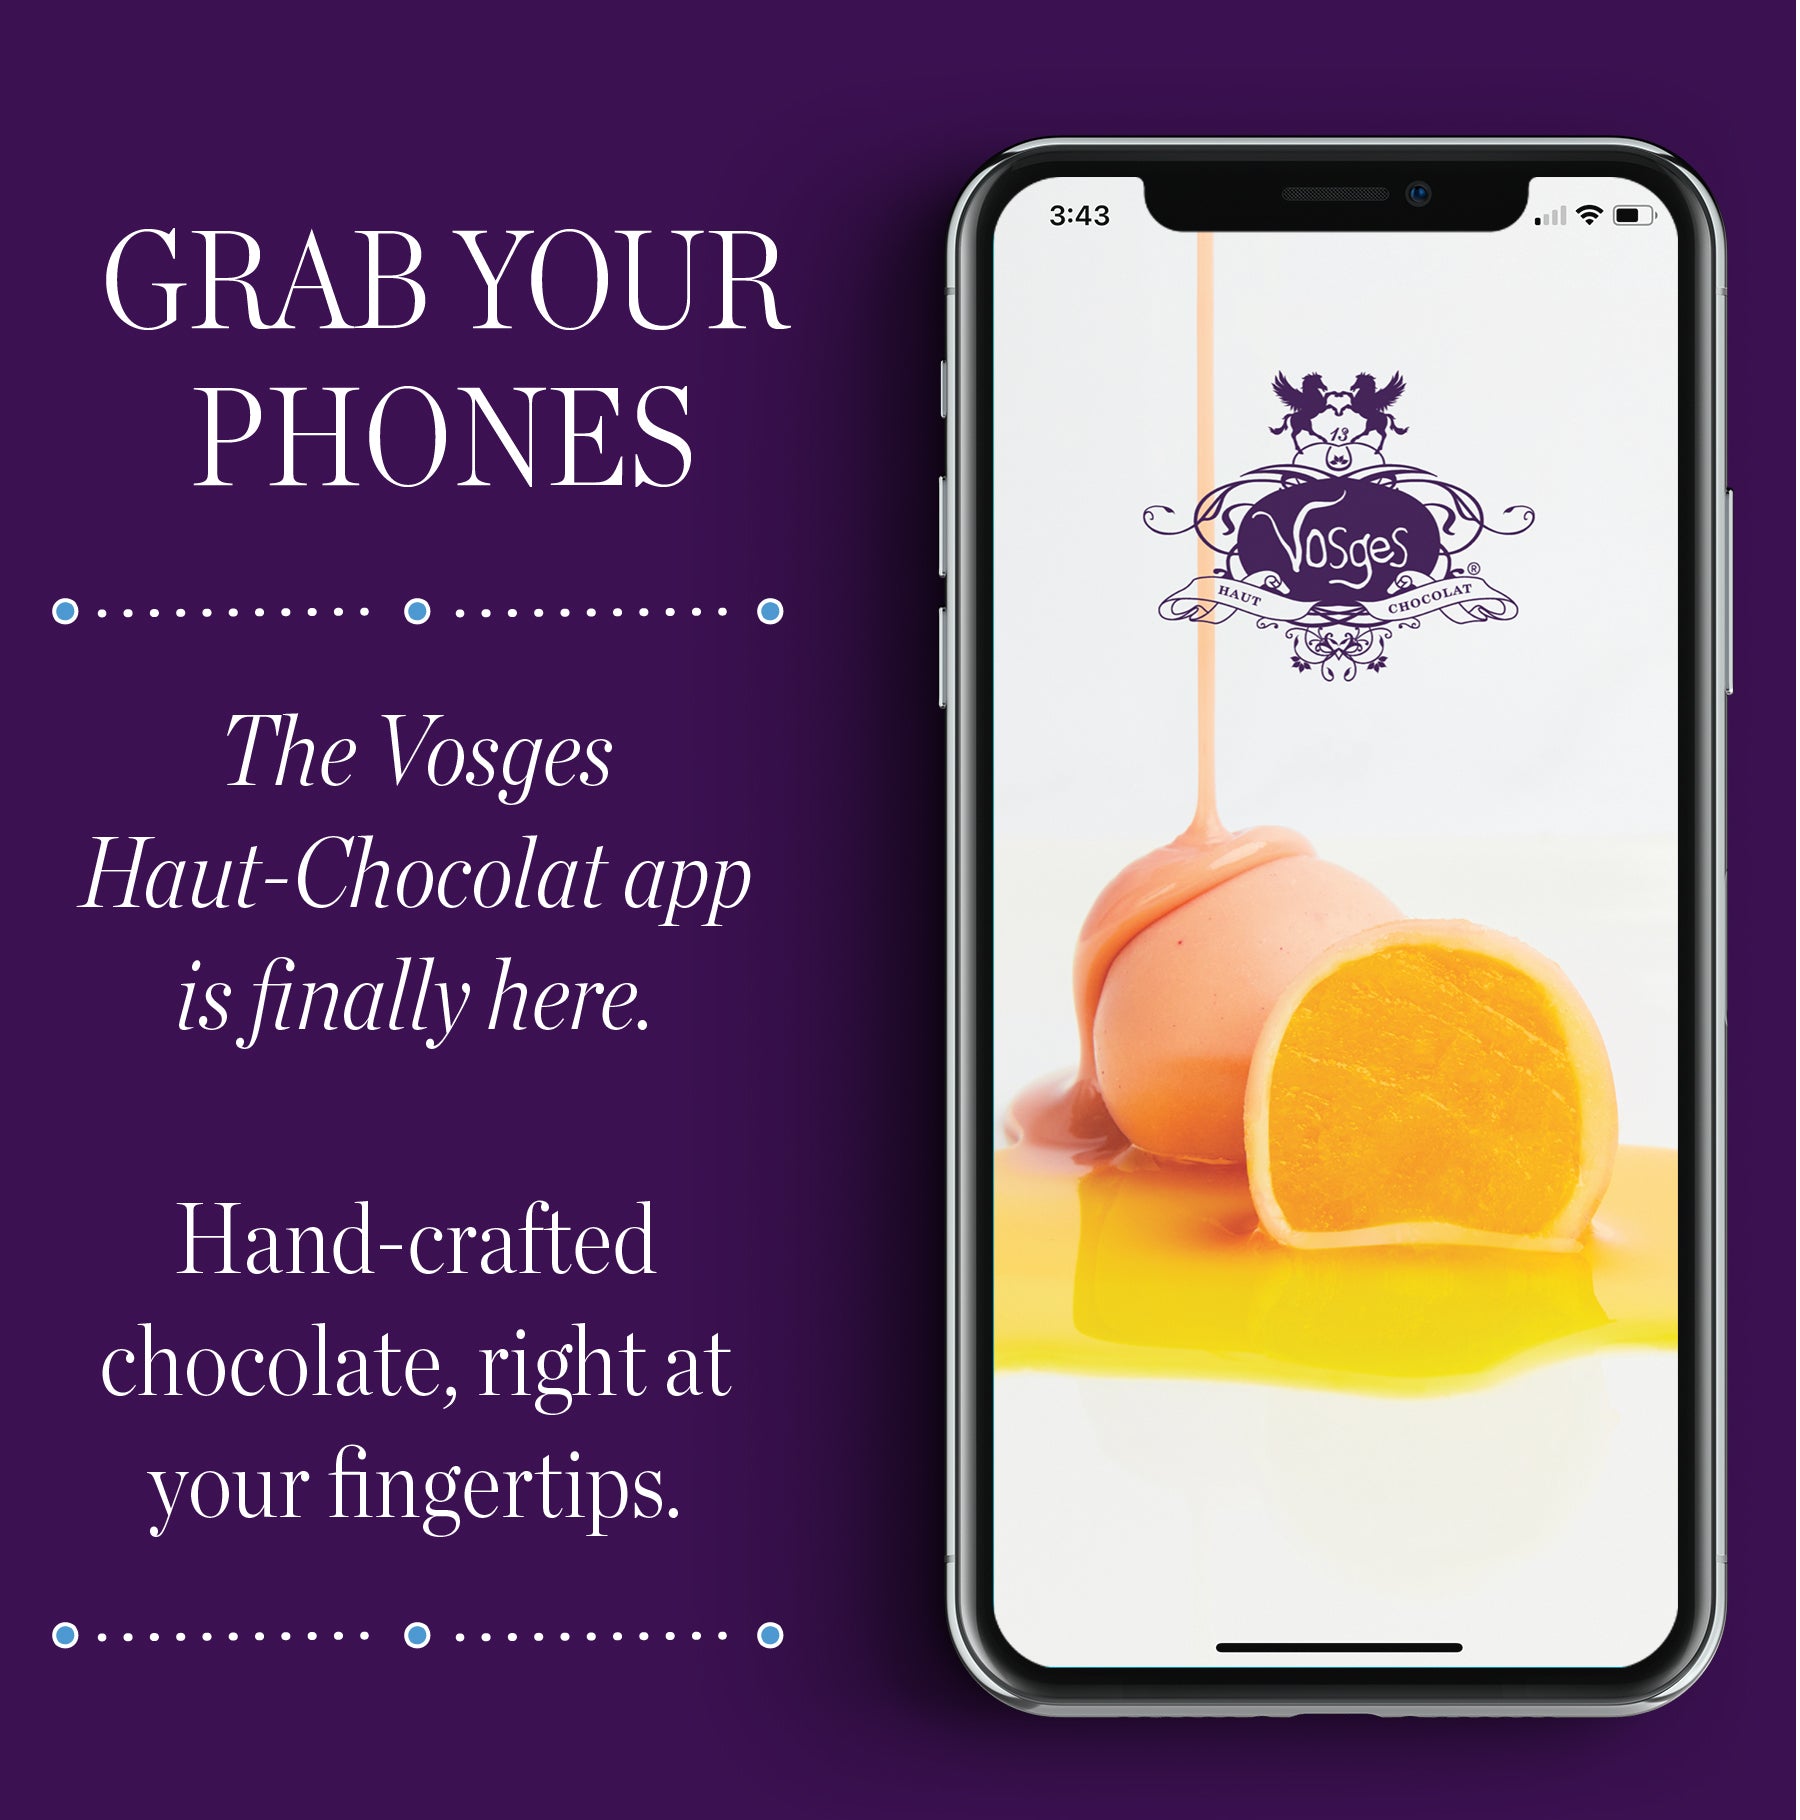 vosges-haut-chocolat-blog/the-vosges-mobile-app-is-finally-here